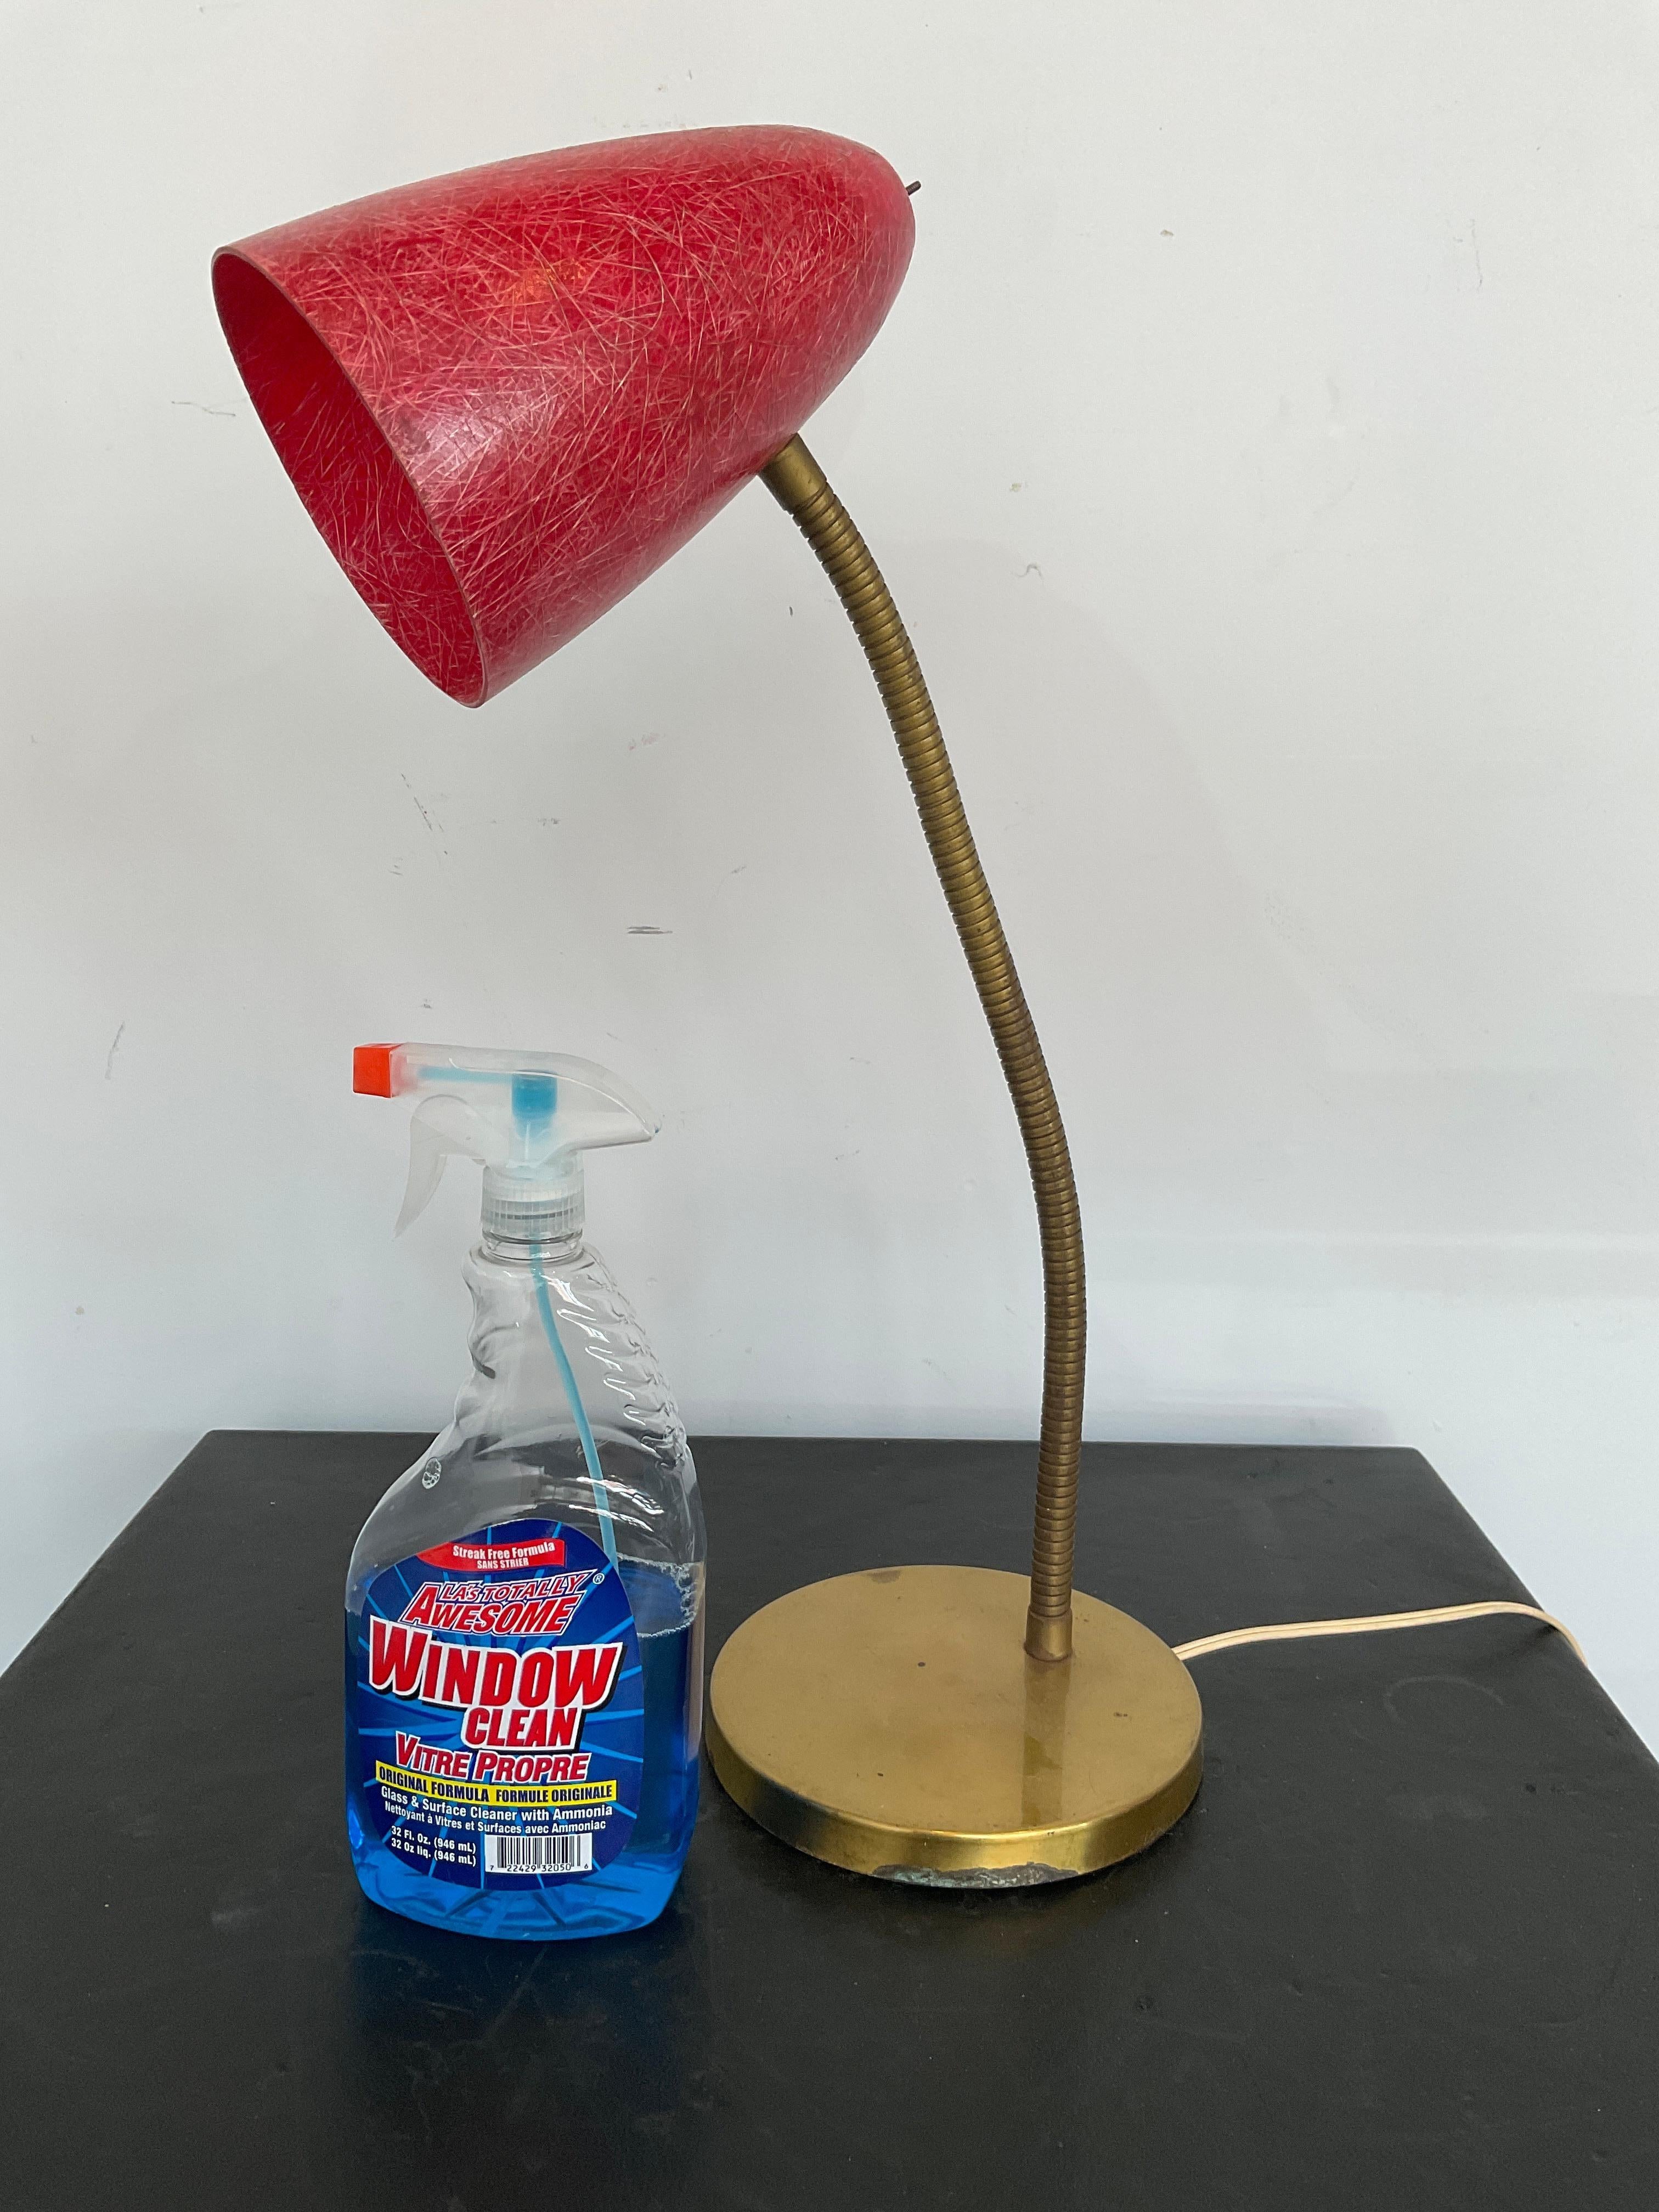 Fiberglass shade on brass coated base with adjustable arm lamp.